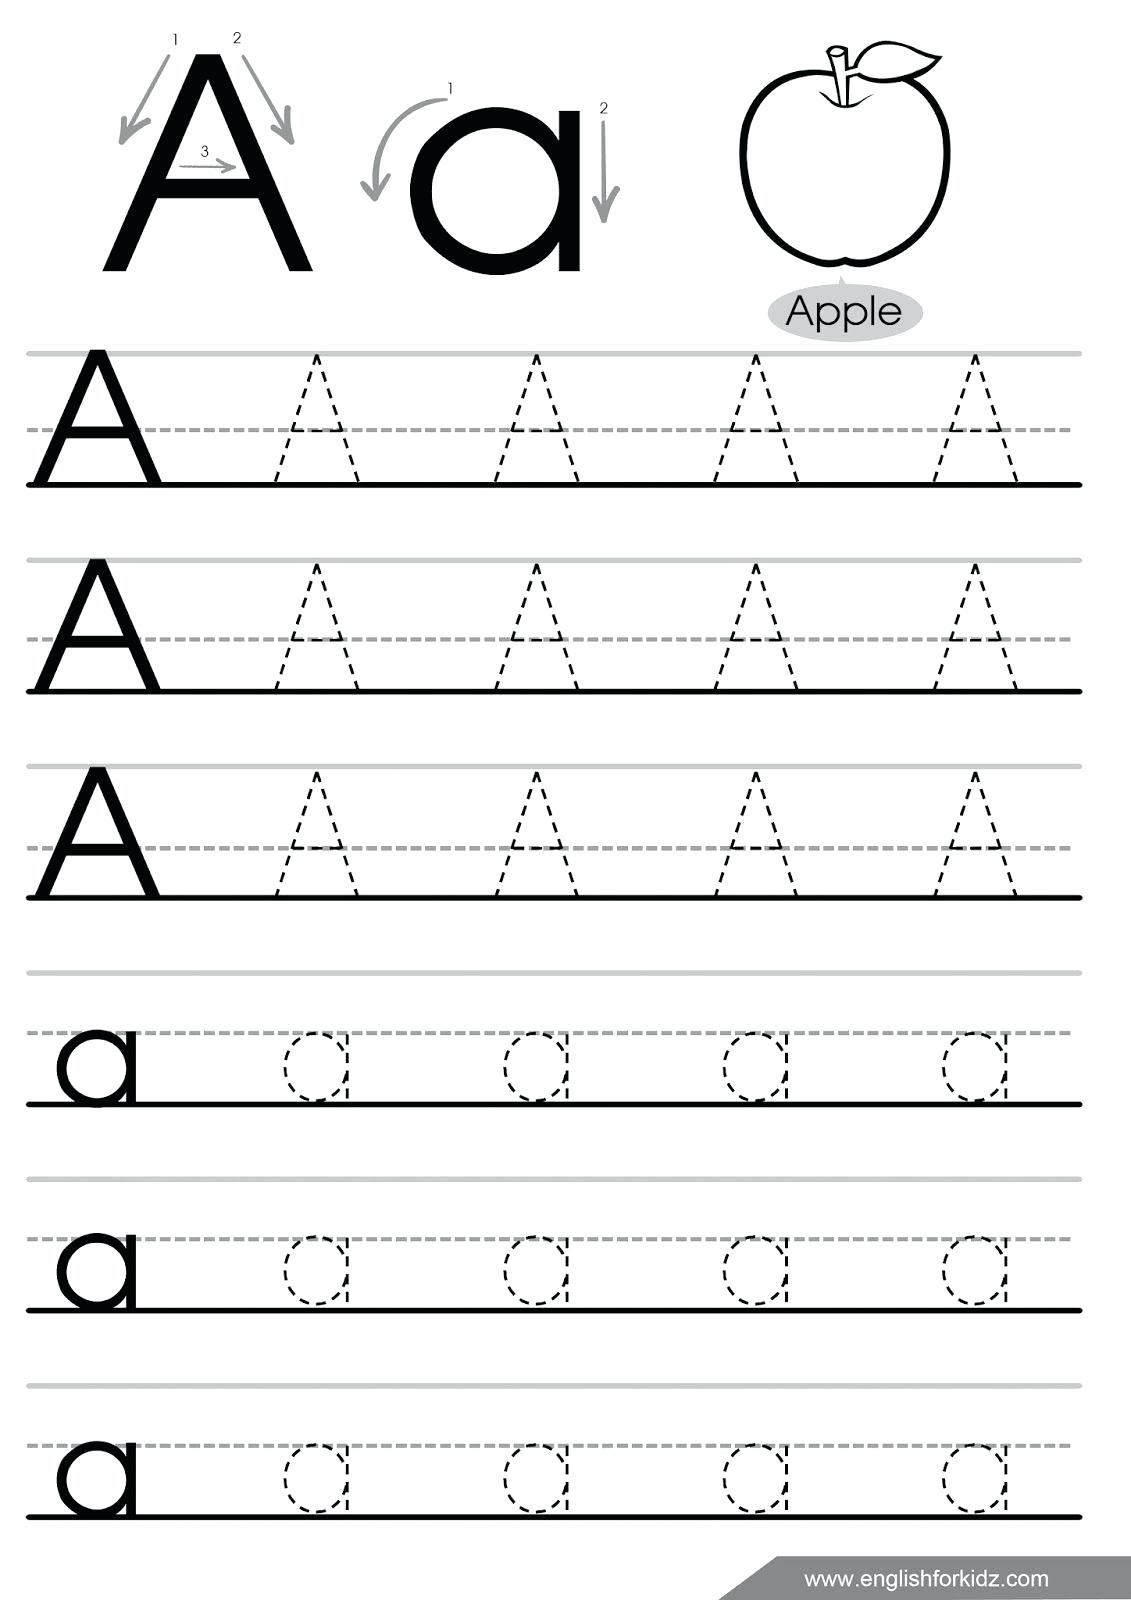 Letter Tracing Worksheets Uppercase And Lowercase Letters regarding Trace Letter A Worksheets Free